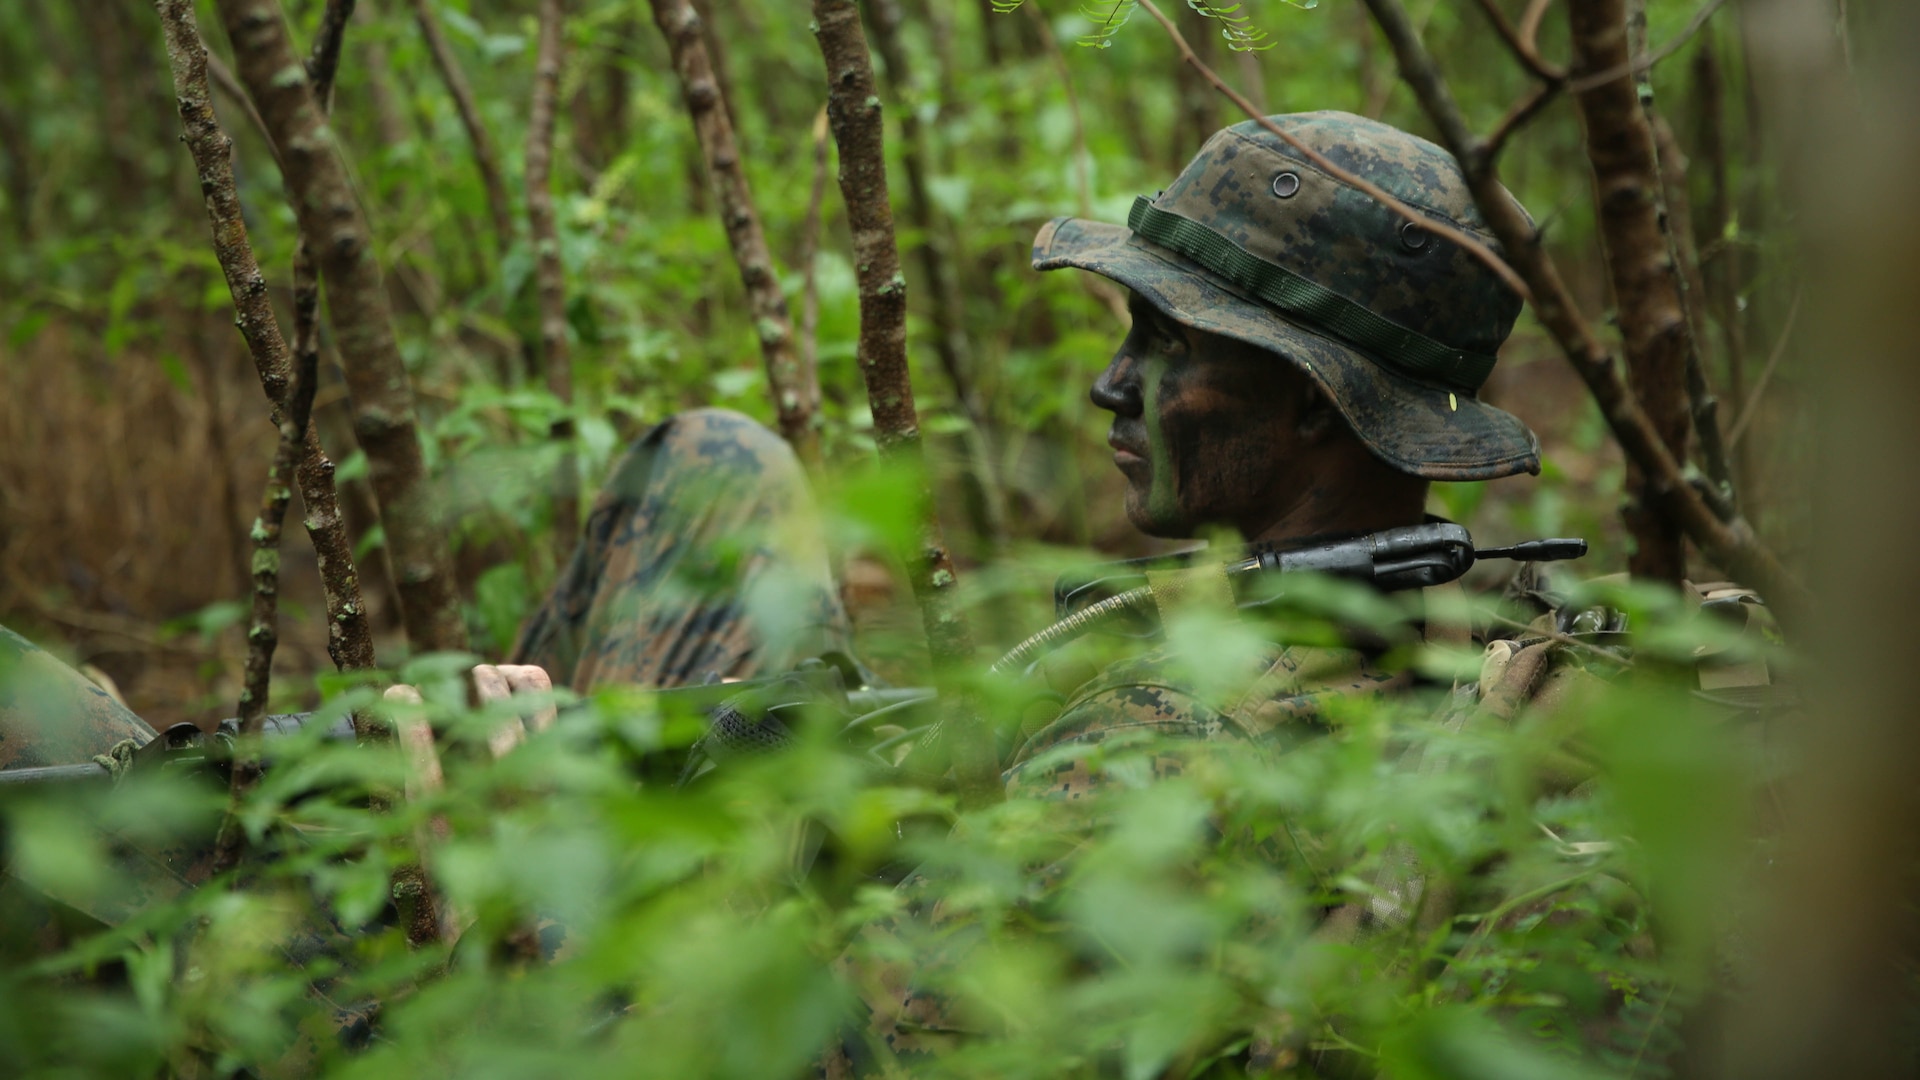 Corporal Jordan Clymer, from Mt. Ayer, Iowa, and assistant radio operator with Company A, 1st Reconnaissance Battalion, 1st Marine Division, rests during reconnaissance and surveillance training, Nov. 19-21, 2015, aboard Marine Corps Training Area Bellows, Hawaii. The Marines conducted insertion, infiltration, execution, exfiltration, and extraction in terrain unfamiliar to what is usually found at their home base in California. The Hawaiian terrain ranged from beach shores, to dense jungle and open valleys during pouring rains.